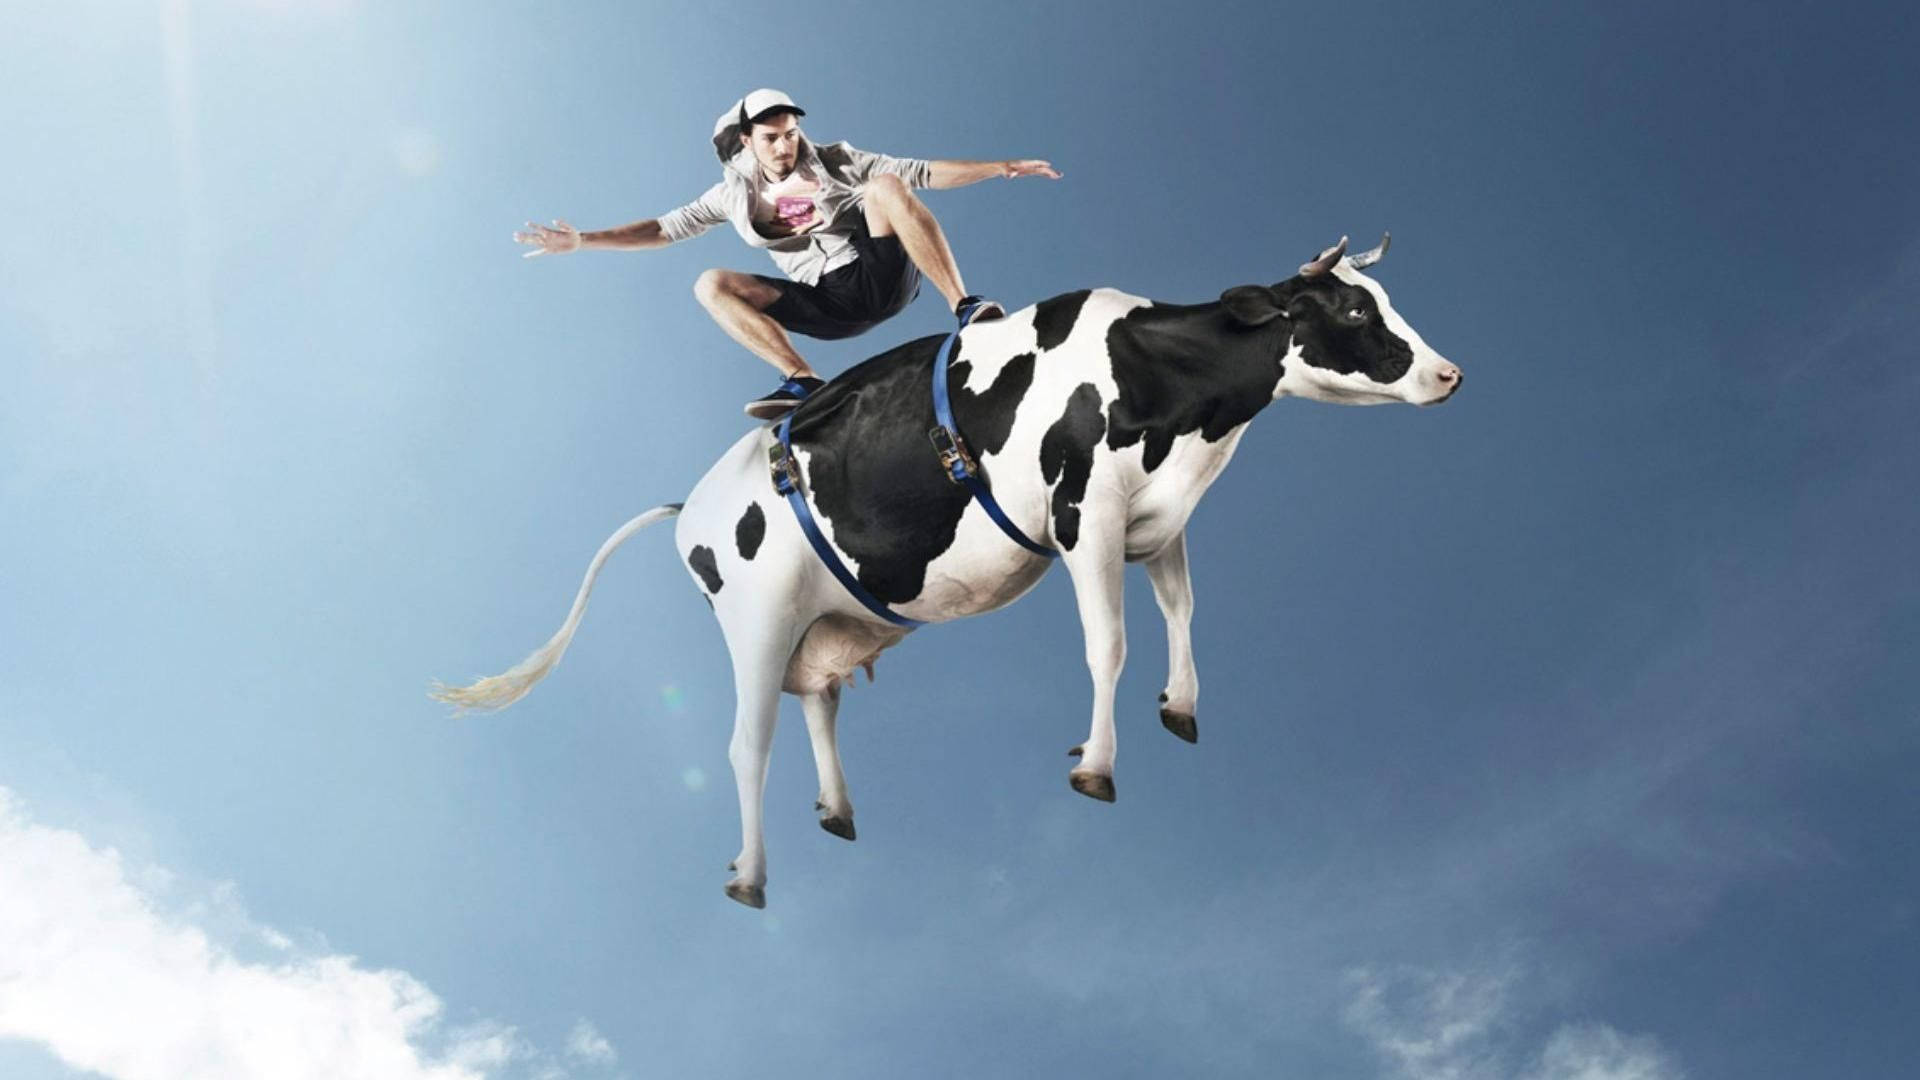 A daring Skater proves no one can keep him from completing his stunts, not even a Cow! Wallpaper